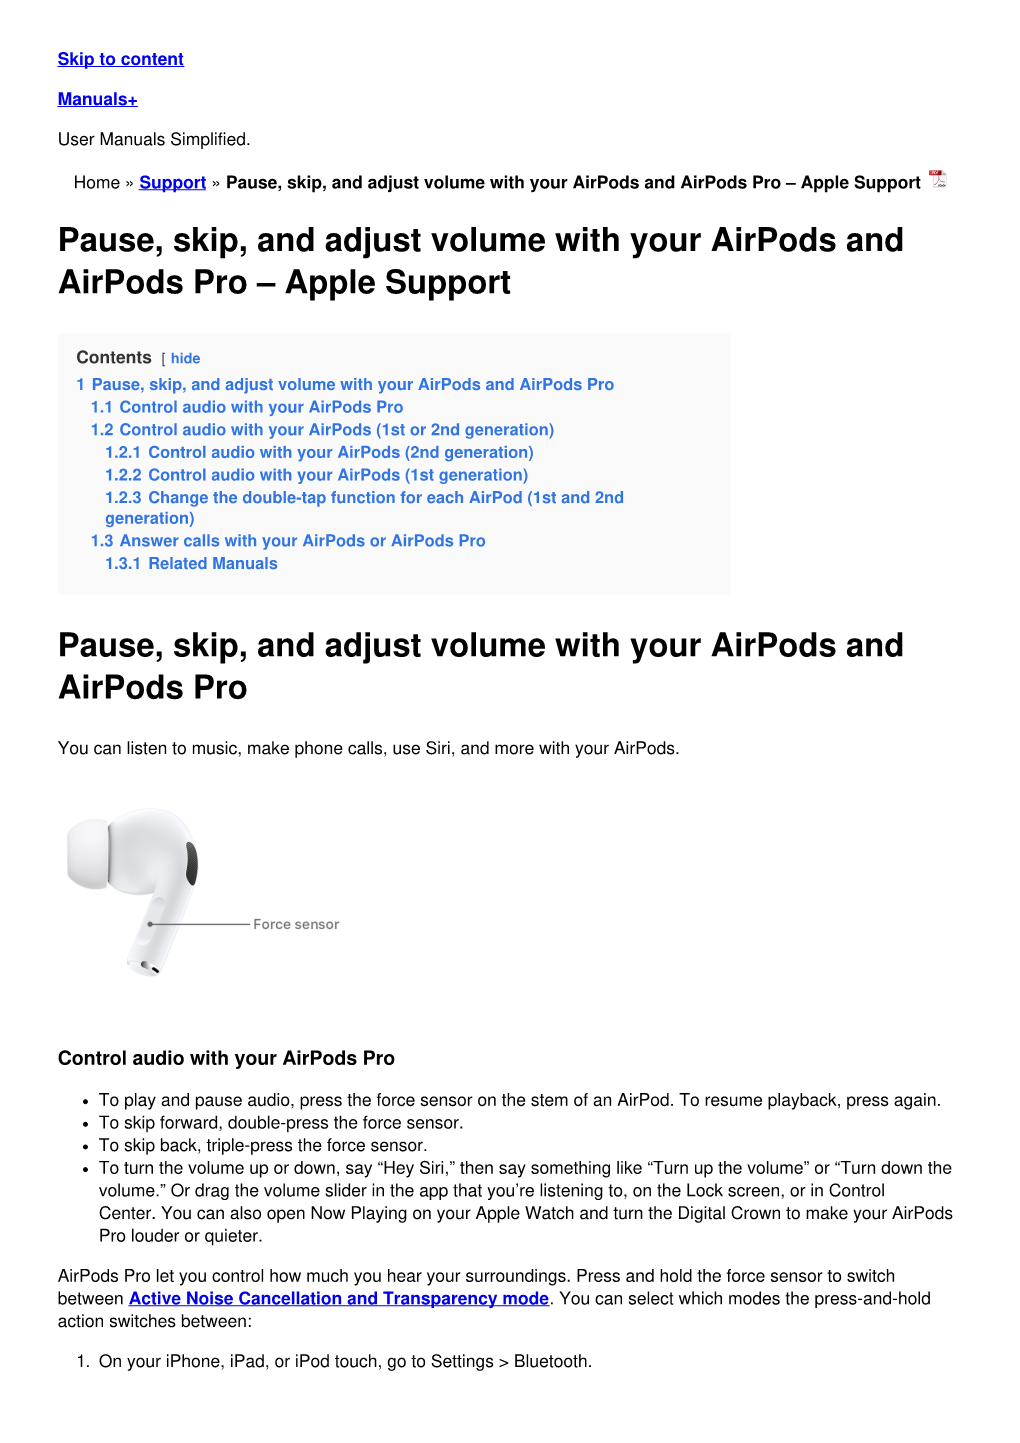 Pause, Skip, and Adjust Volume with Your Airpods and Airpods Pro – Apple Support